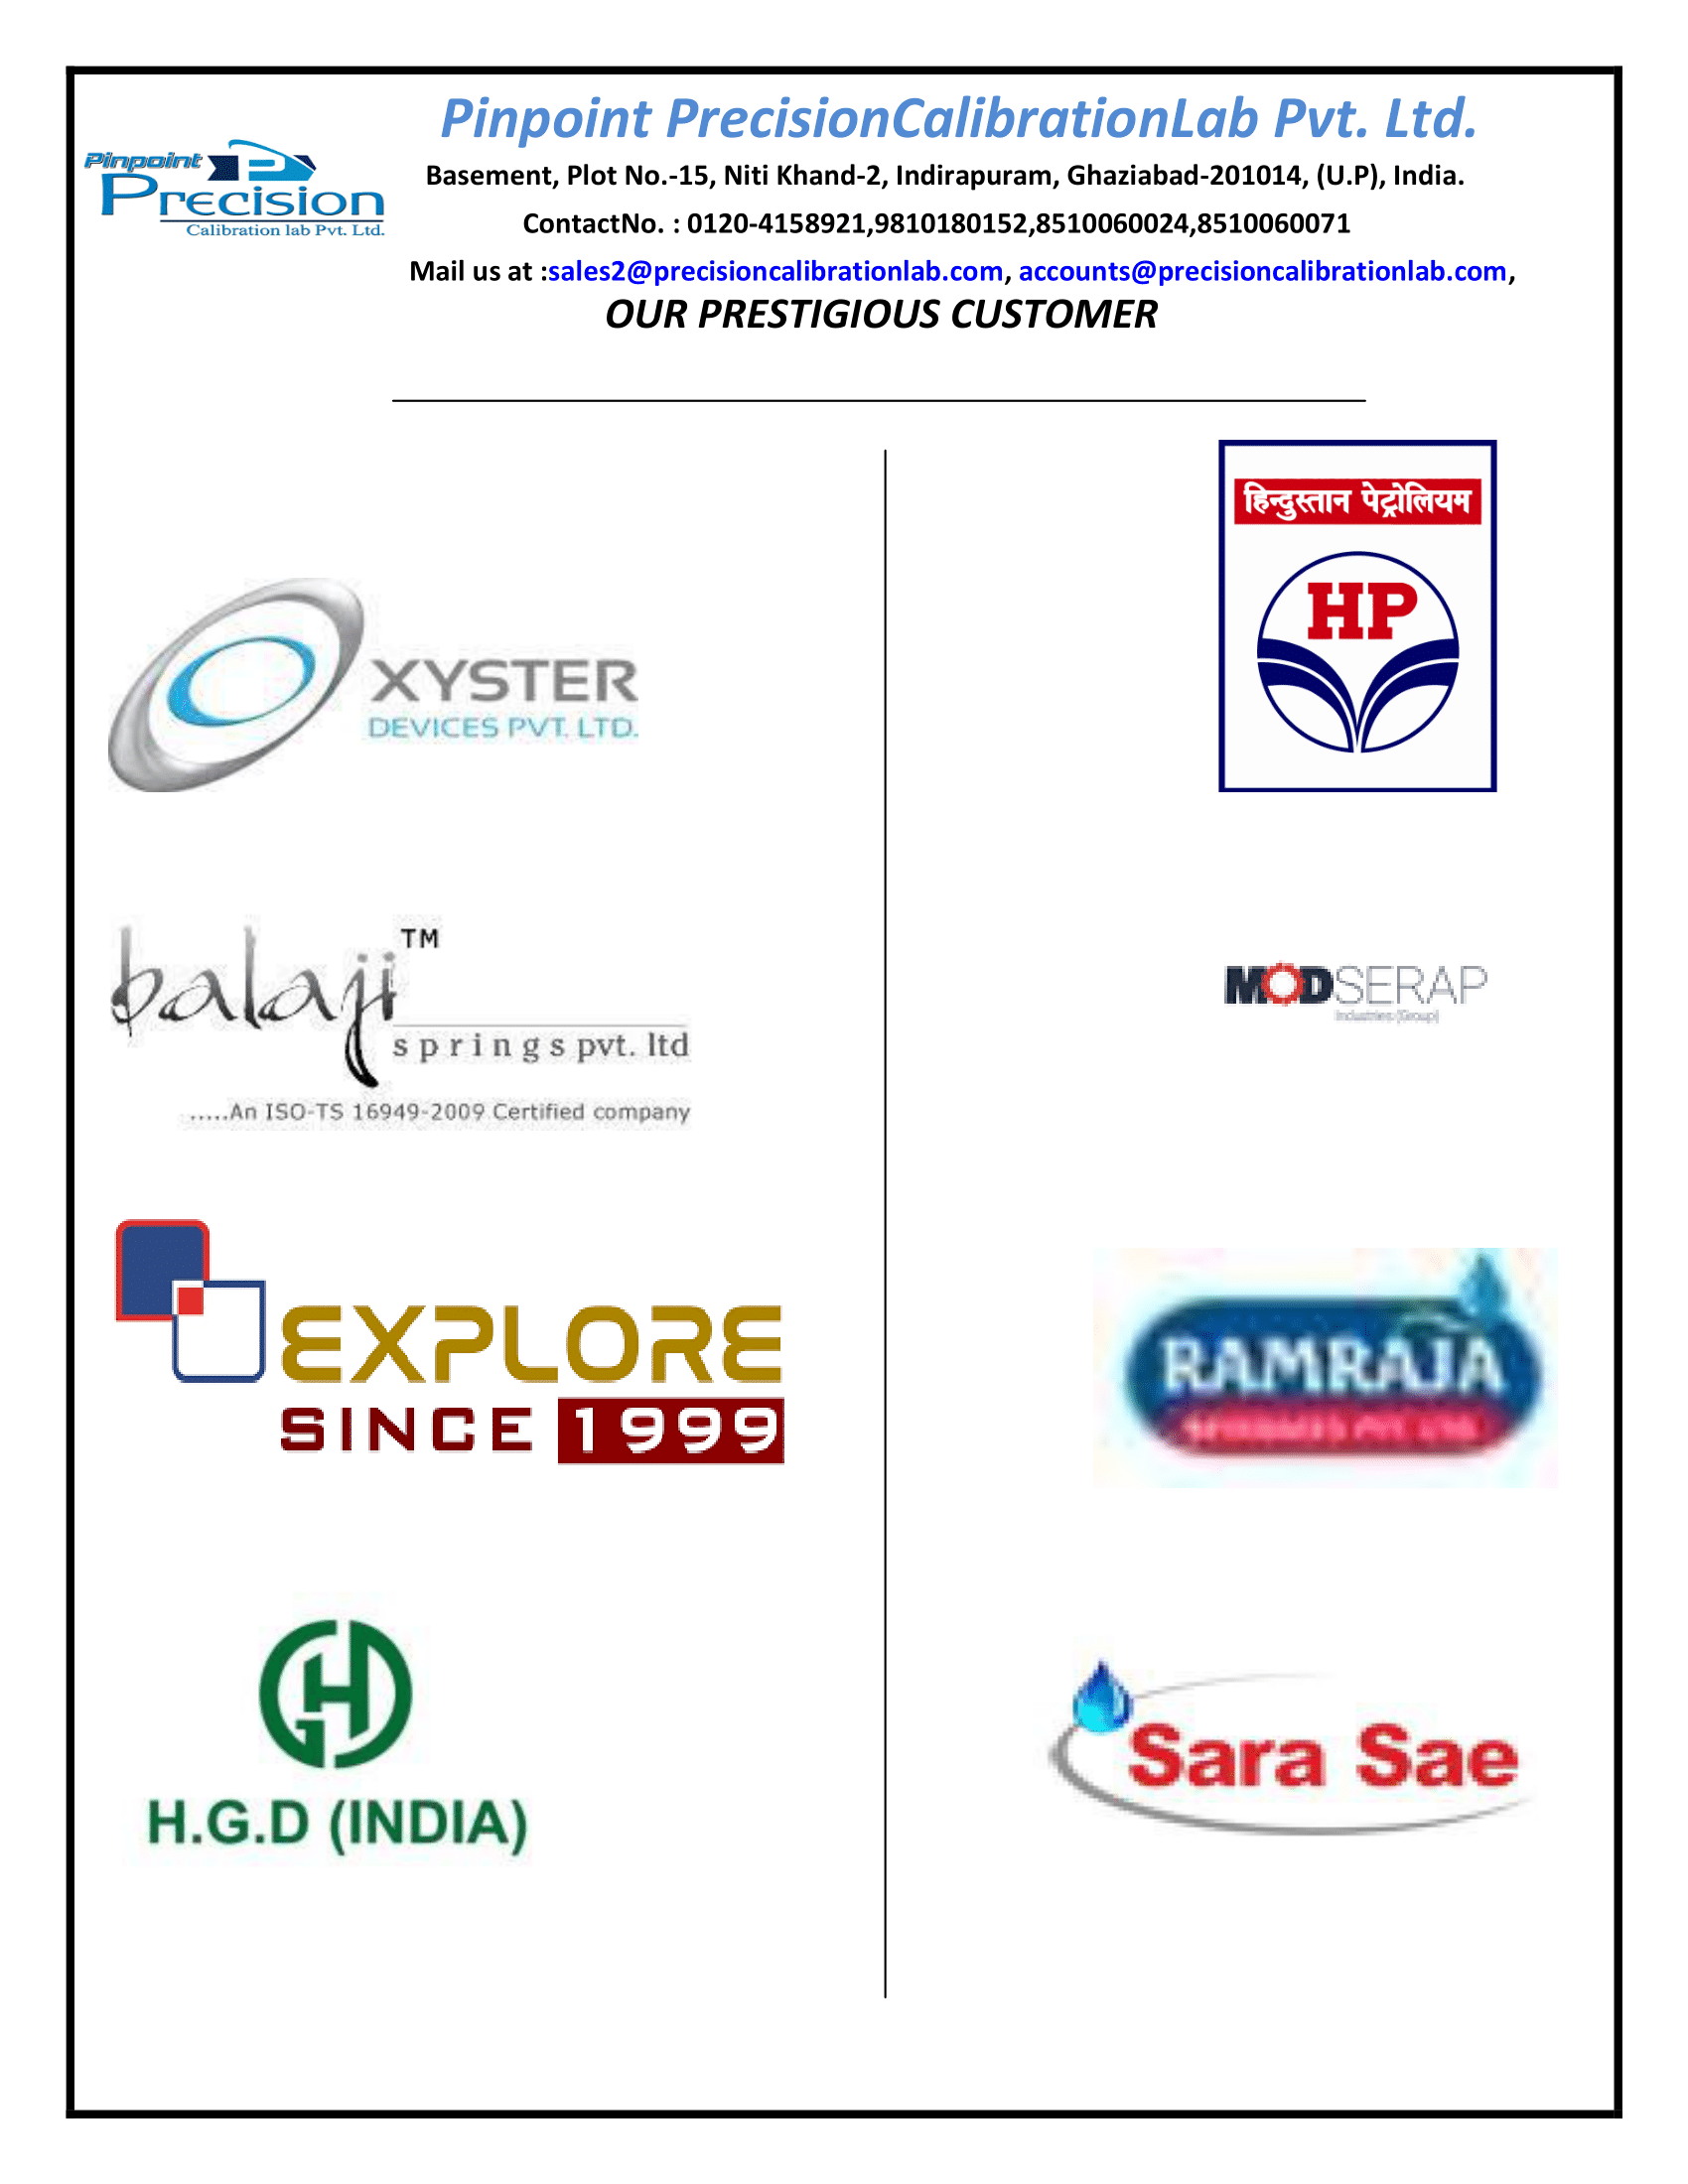 Industries-PCLW client list -3 Ghaziabad-16